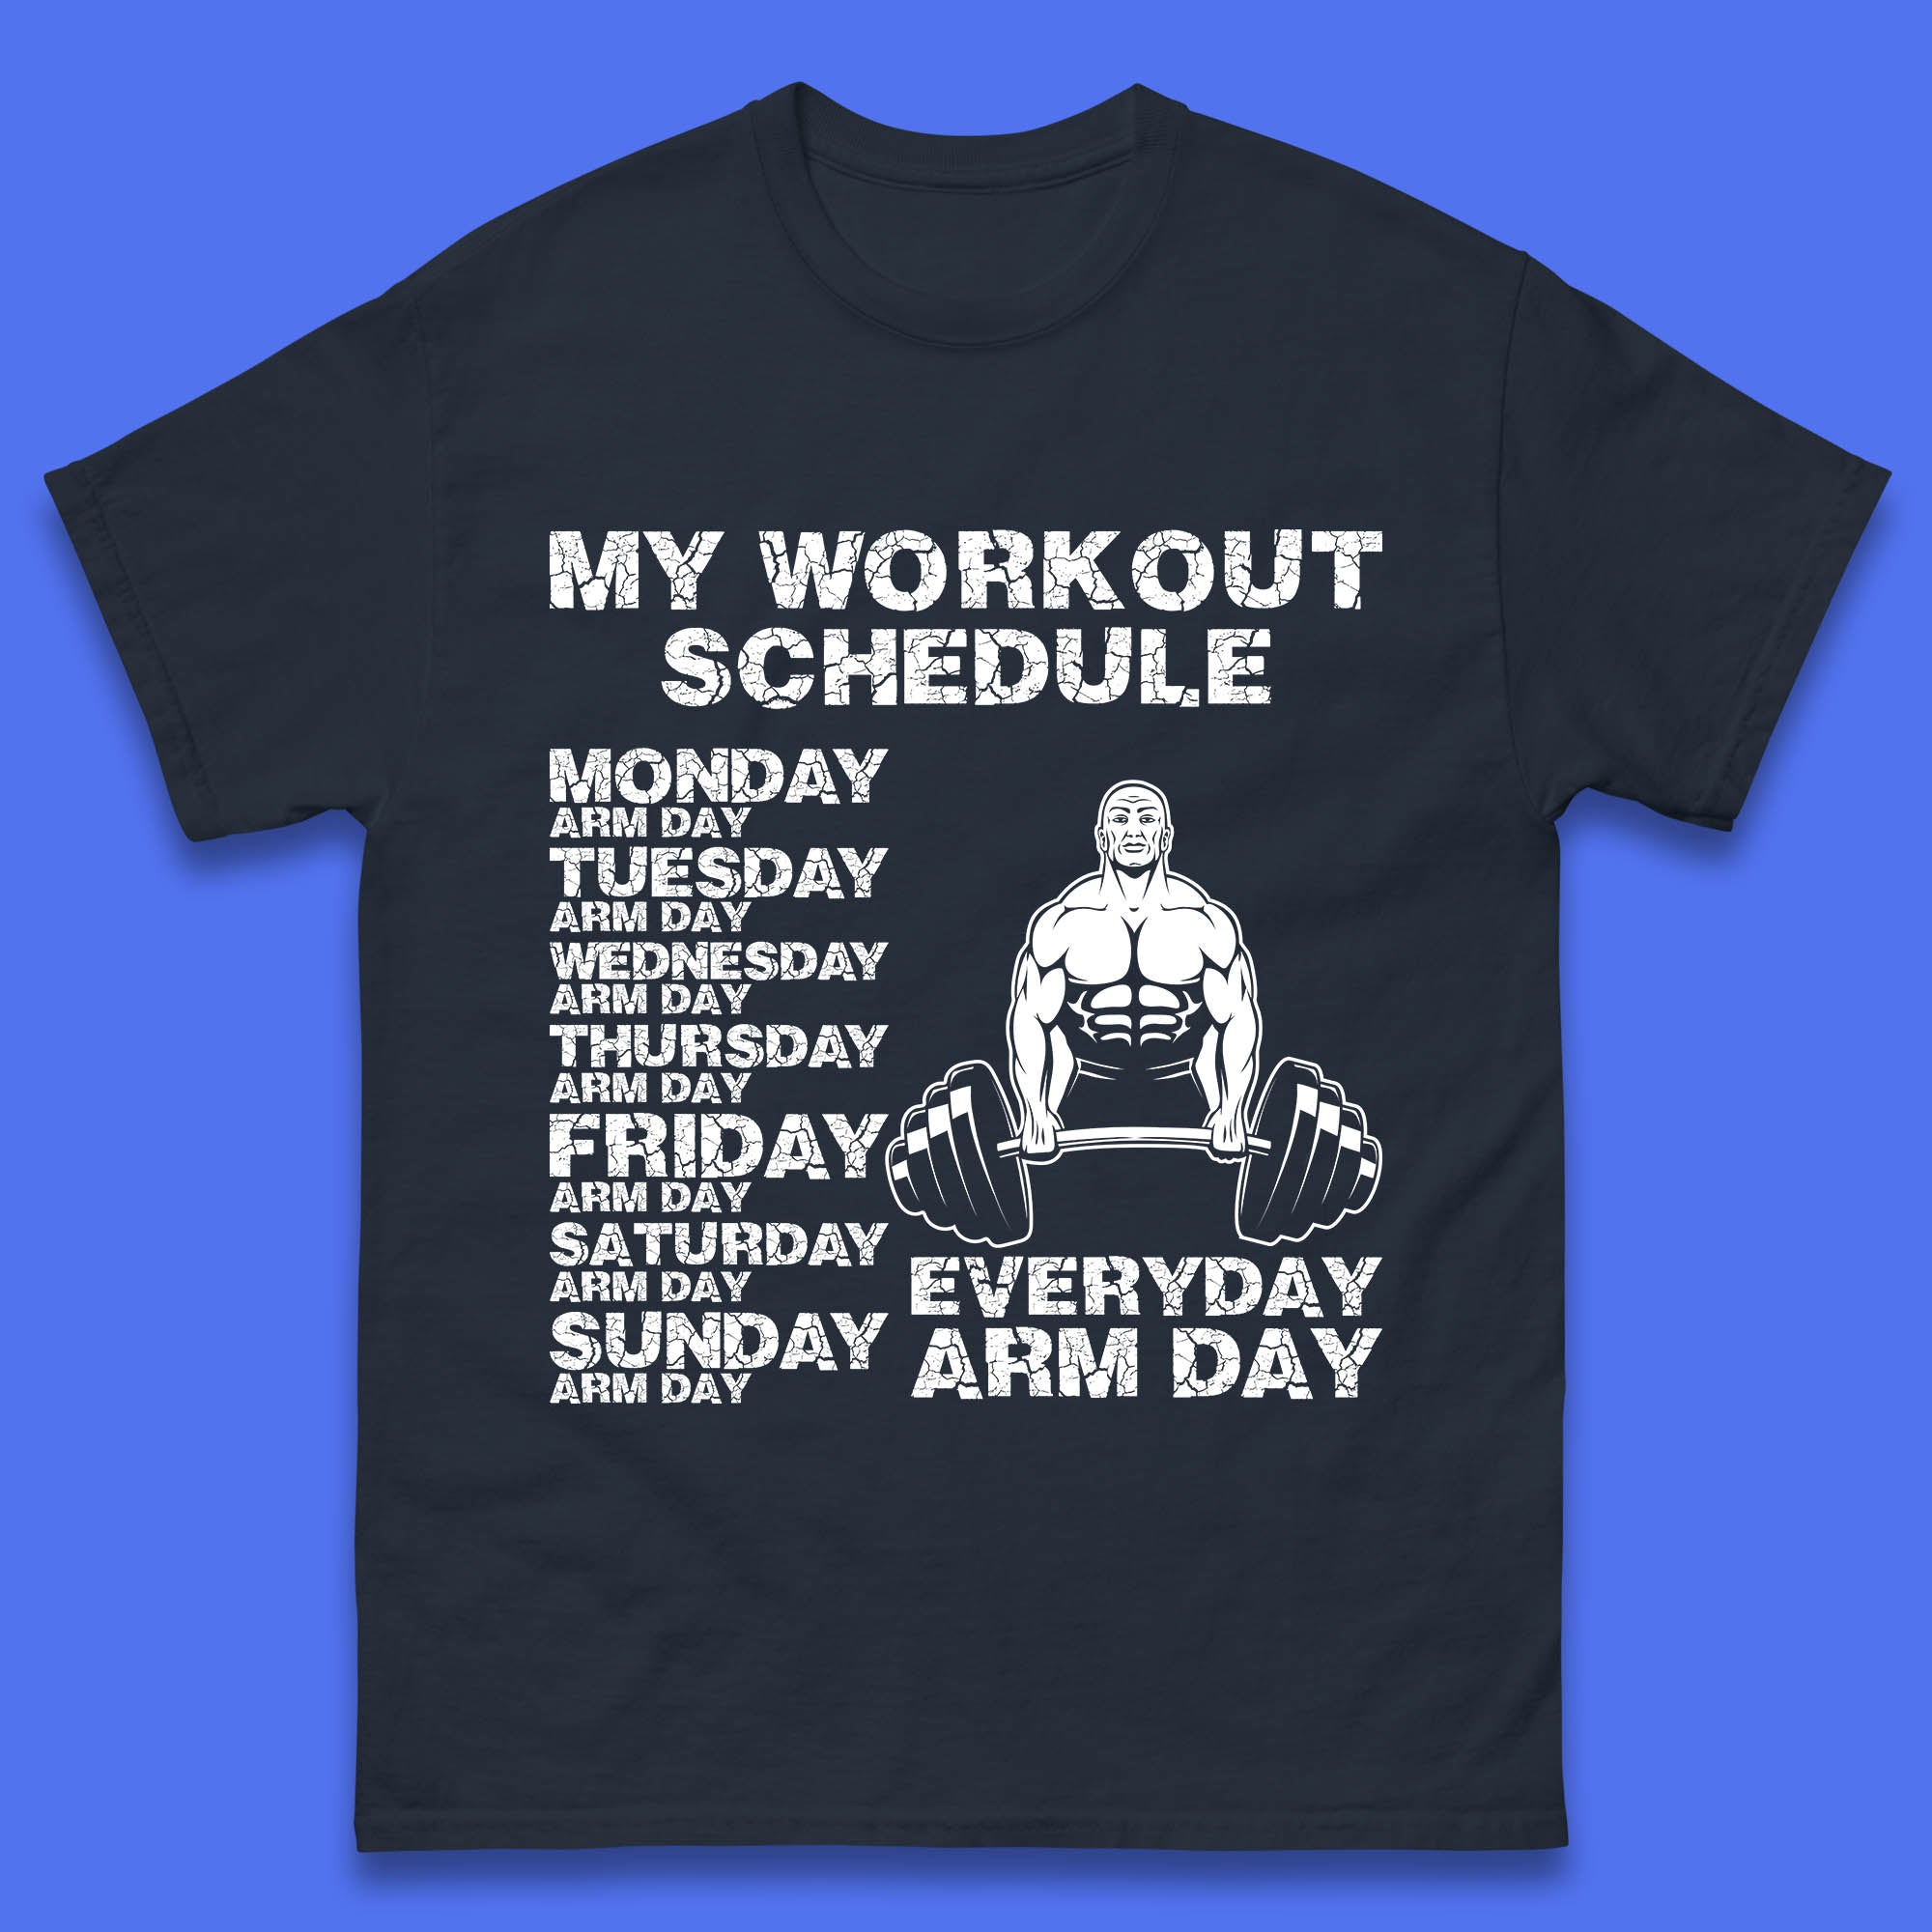 My Workout Schedule Everyday Arm Day Daily Routine  Arm Gym Workout Everyday Of Week Arm Day Fitness Mens Tee Top